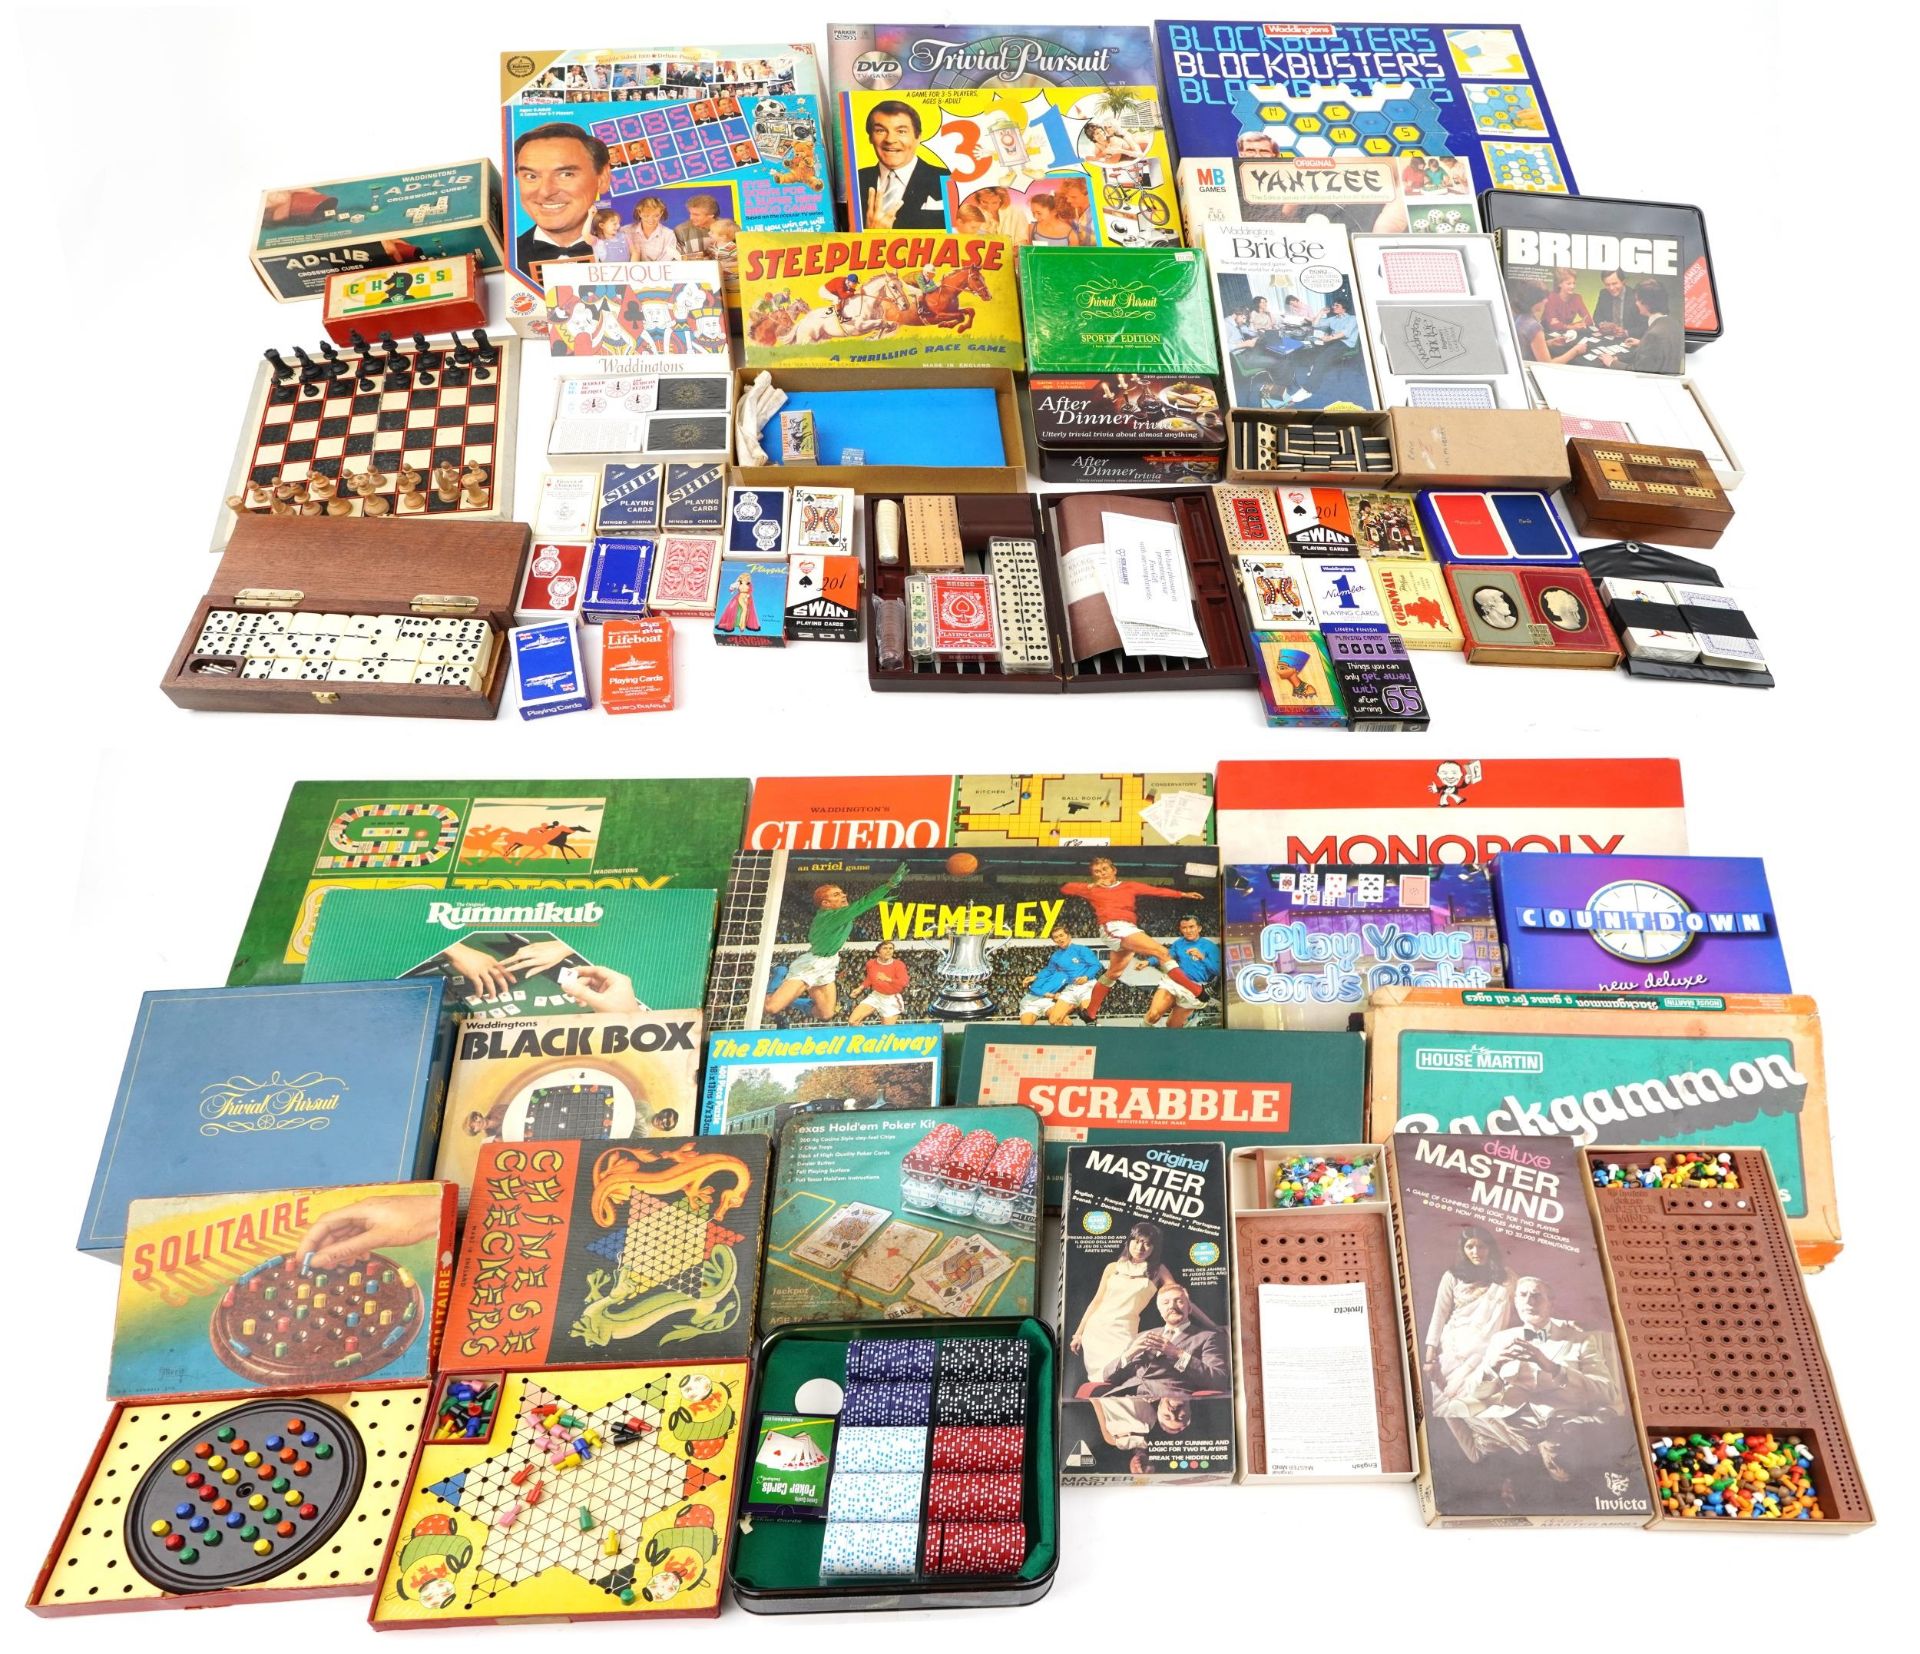 Vintage and later board games including Monopoly, Cluedo, playing cards and Trivial Pursuit